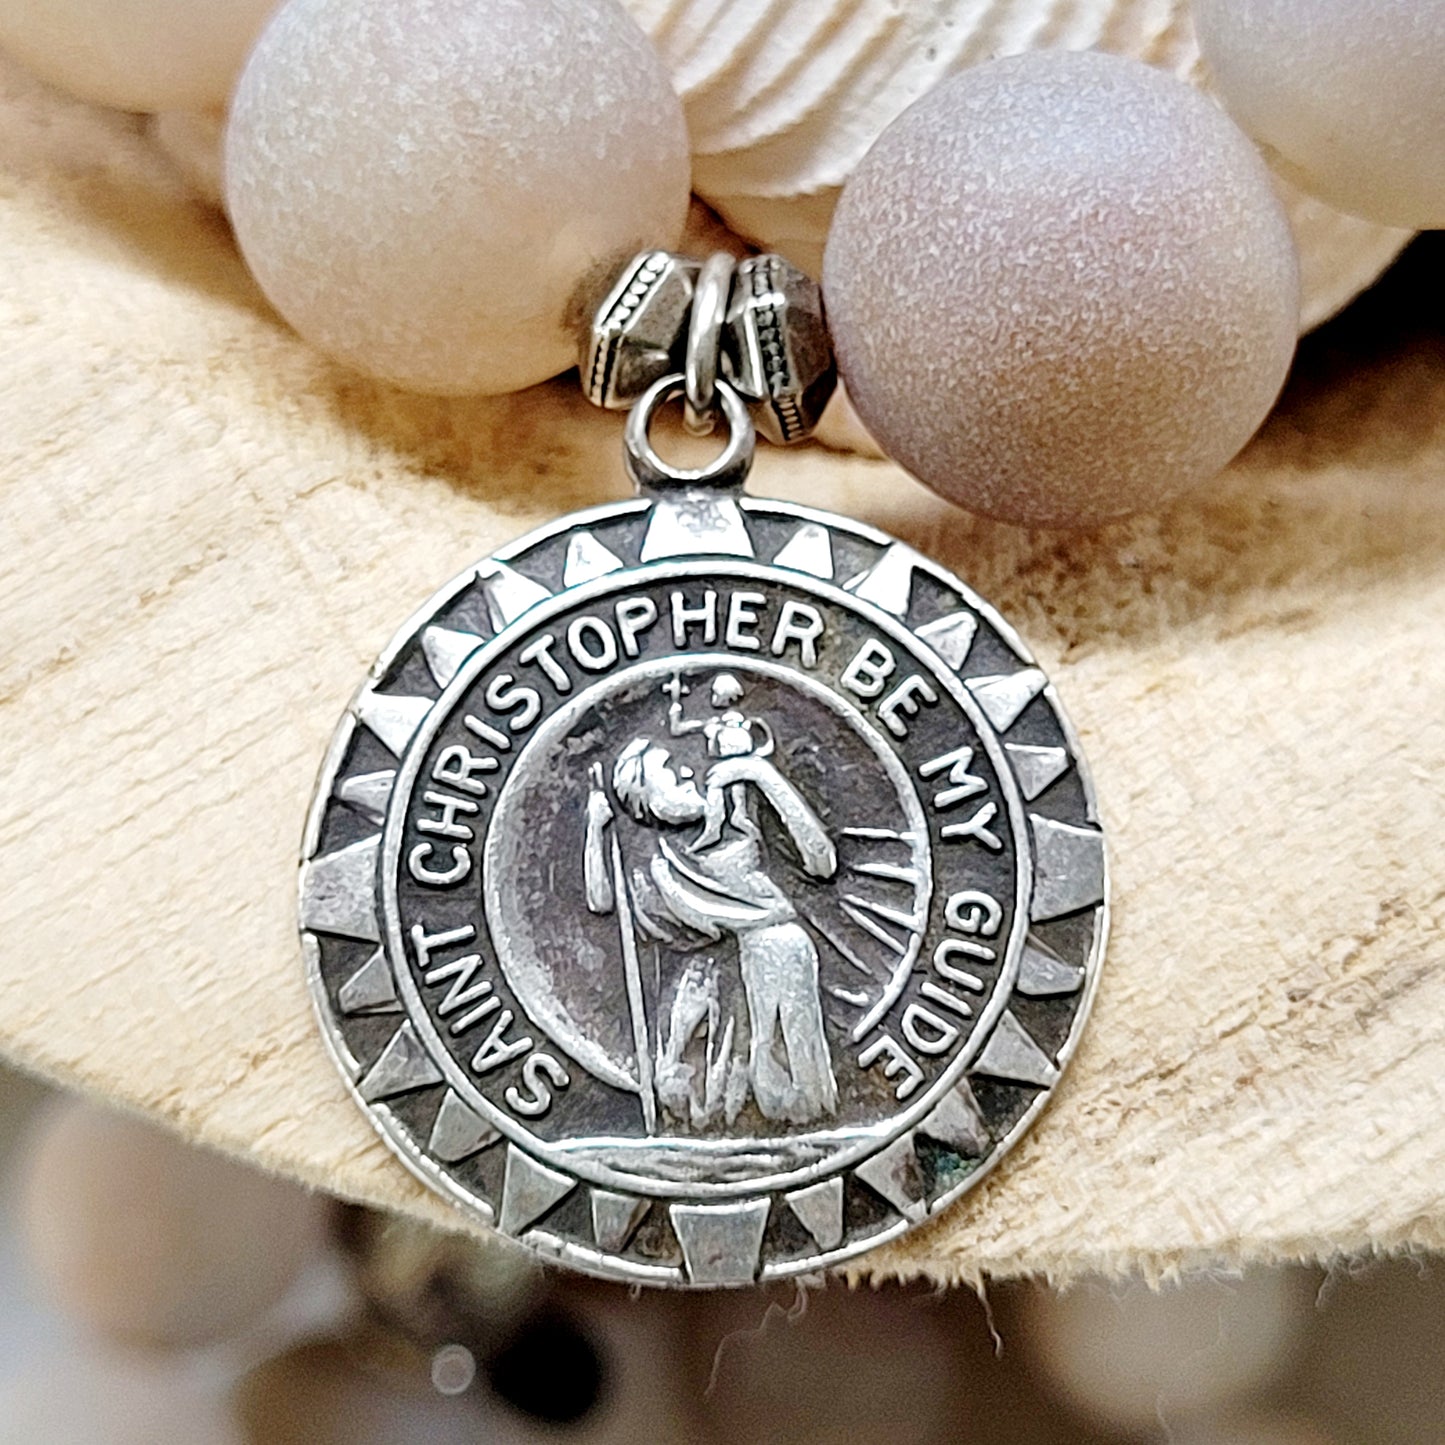 Druzy Agate 12mm Beaded Bracelet with Sterling Silver St. Christopher Medal - Afterlife Jewelry Designs